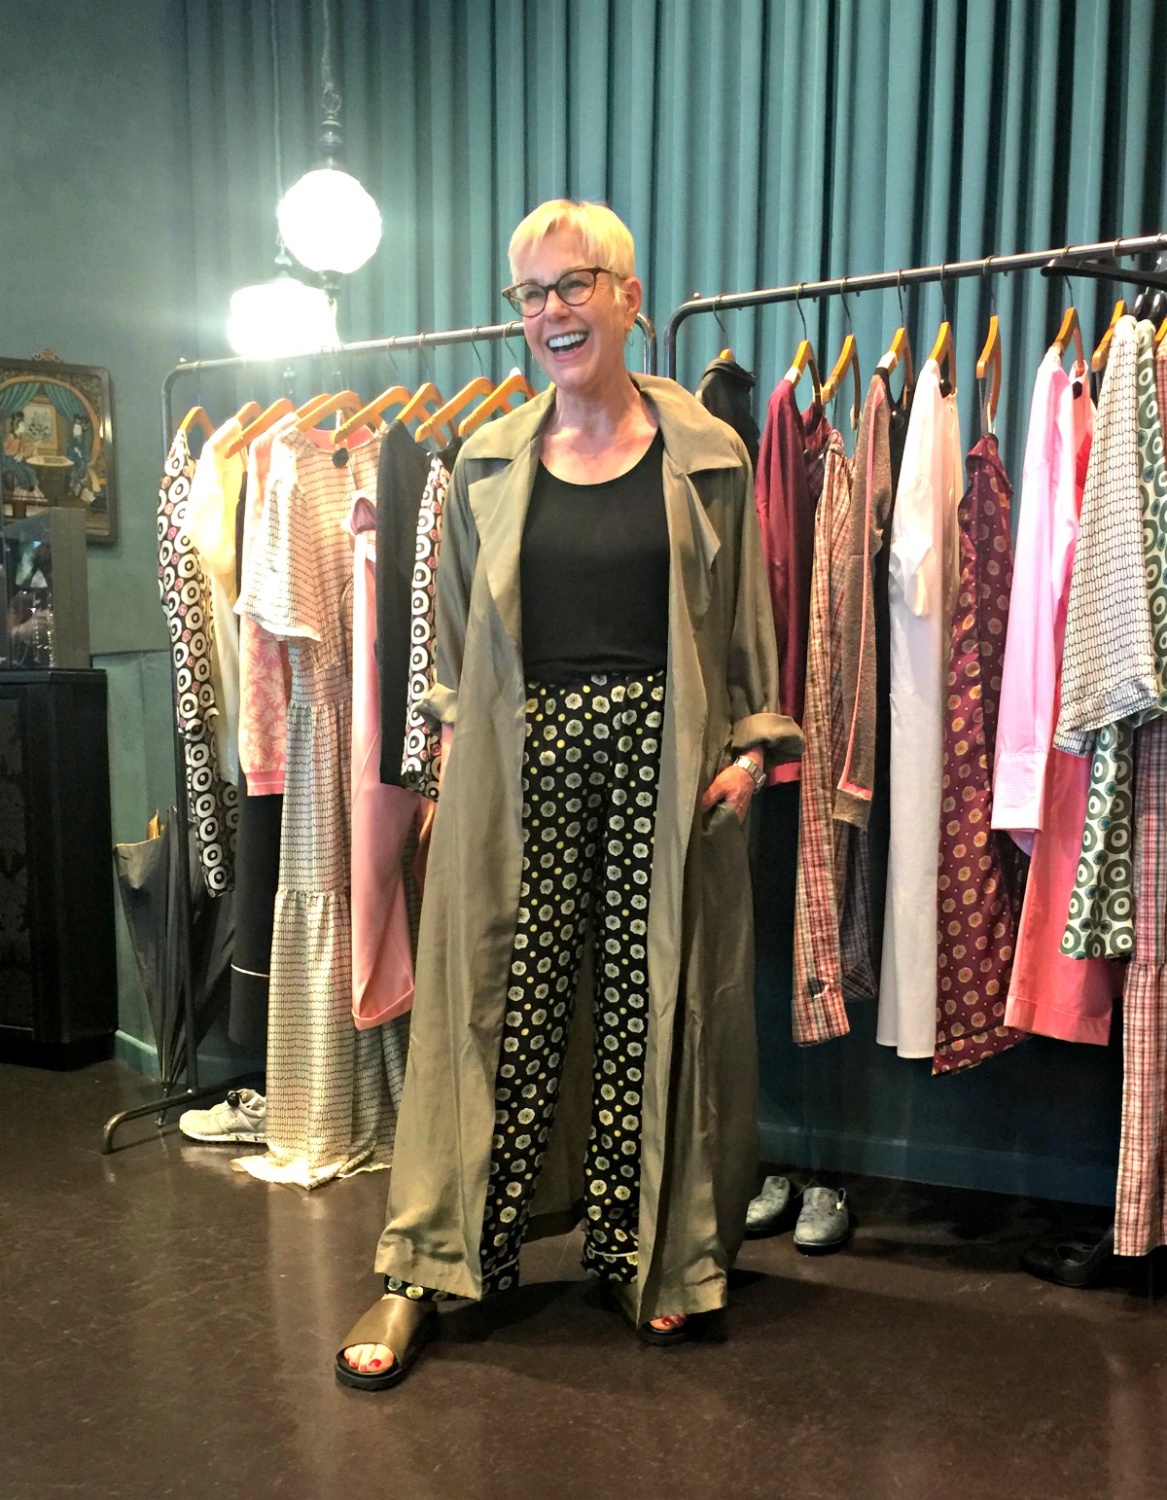 Trying on printed pants and a silky trench coat at Momoni in Paris. Details at une femme d'un certain age.